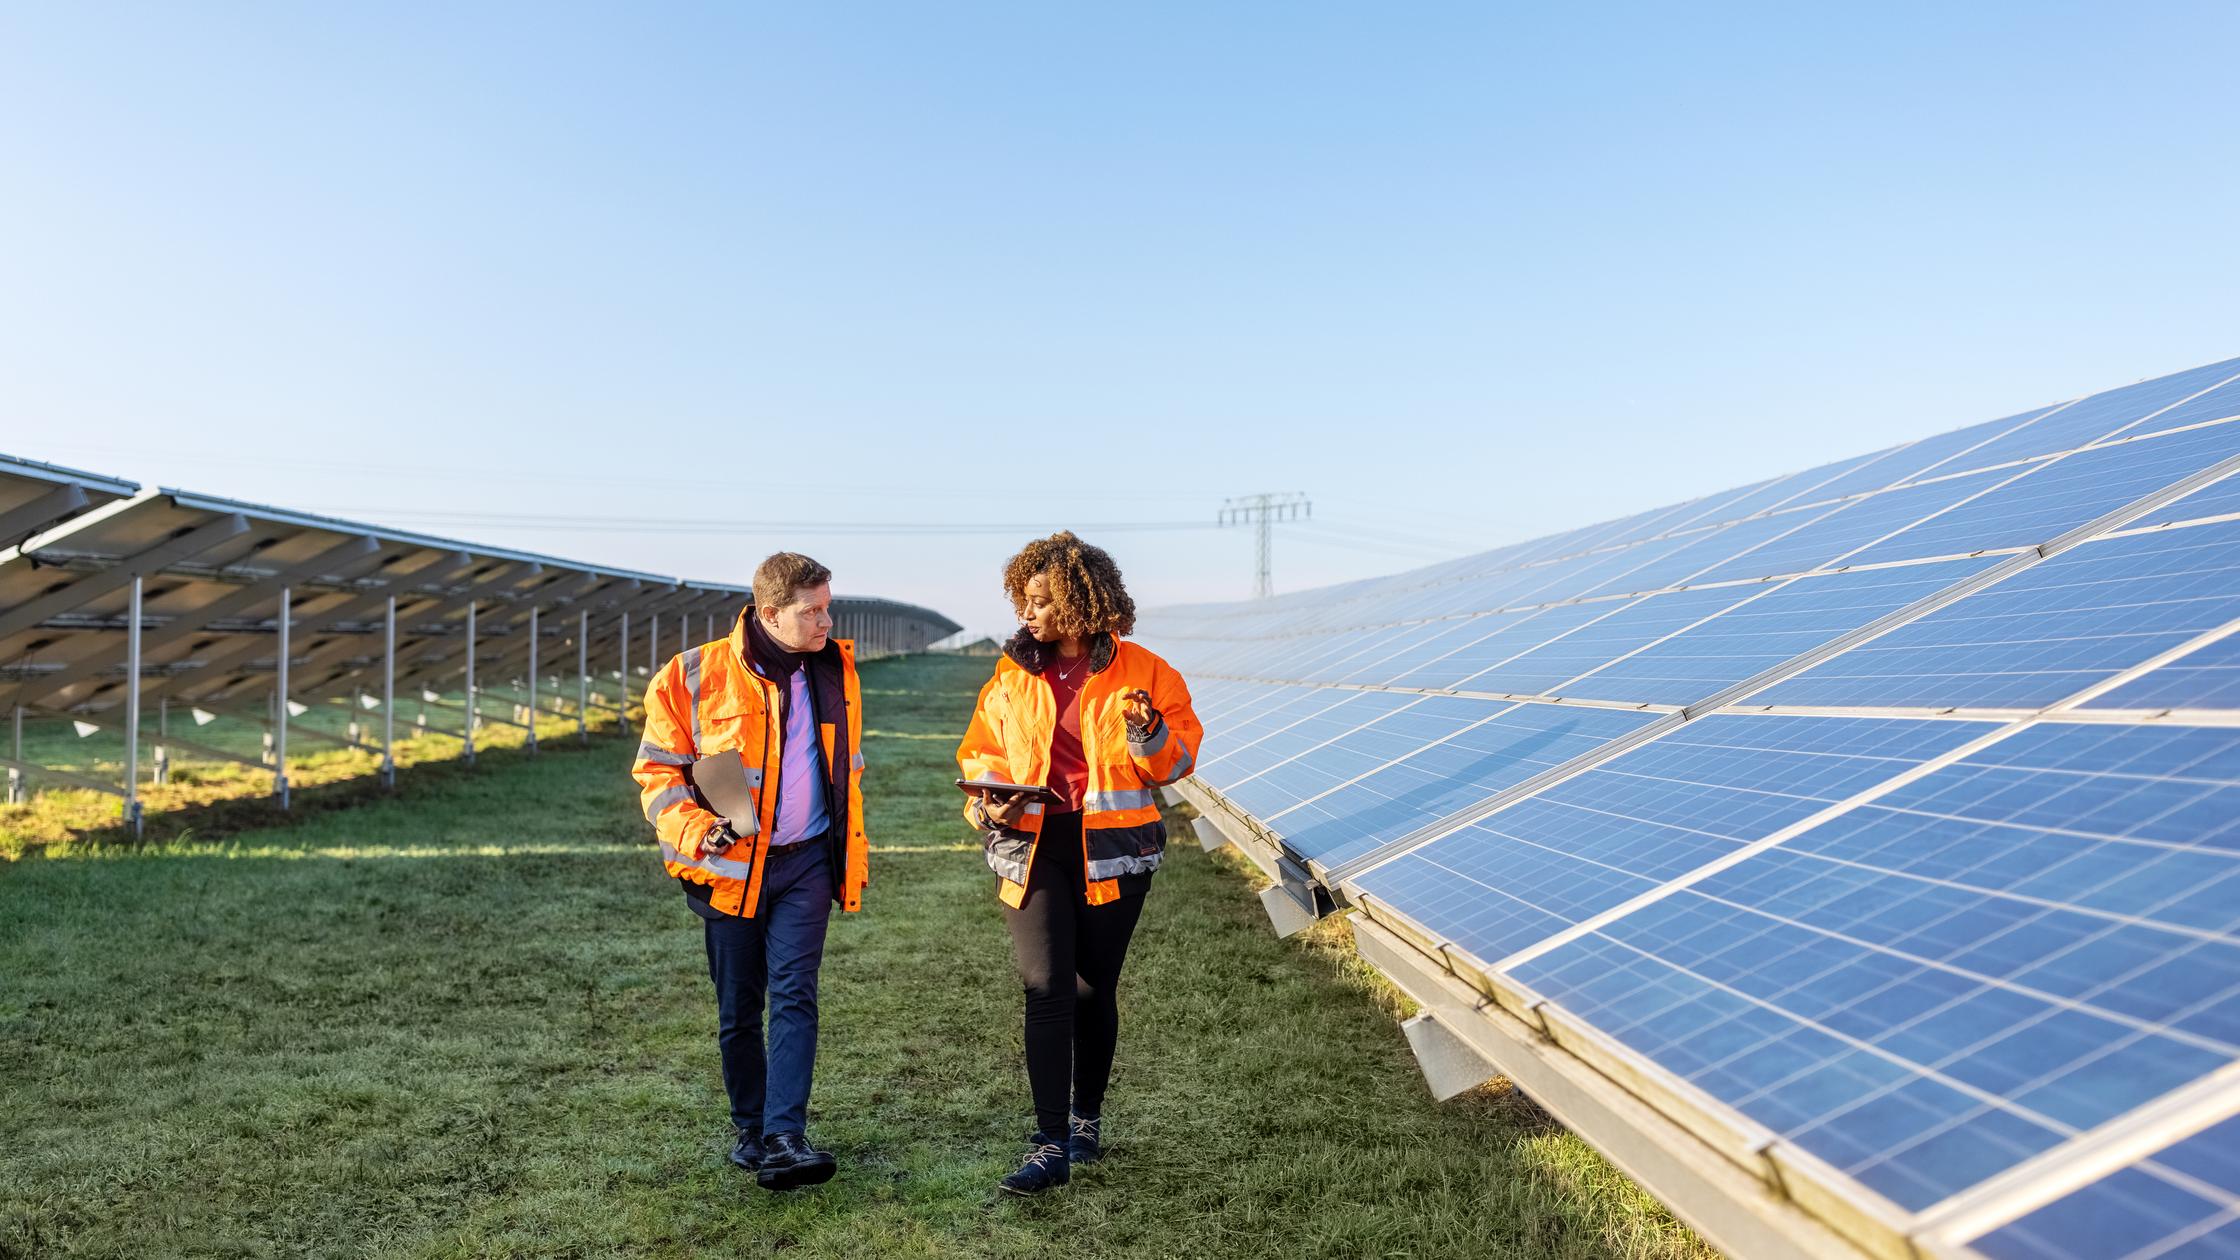 Male and female engineers working at solar power plant